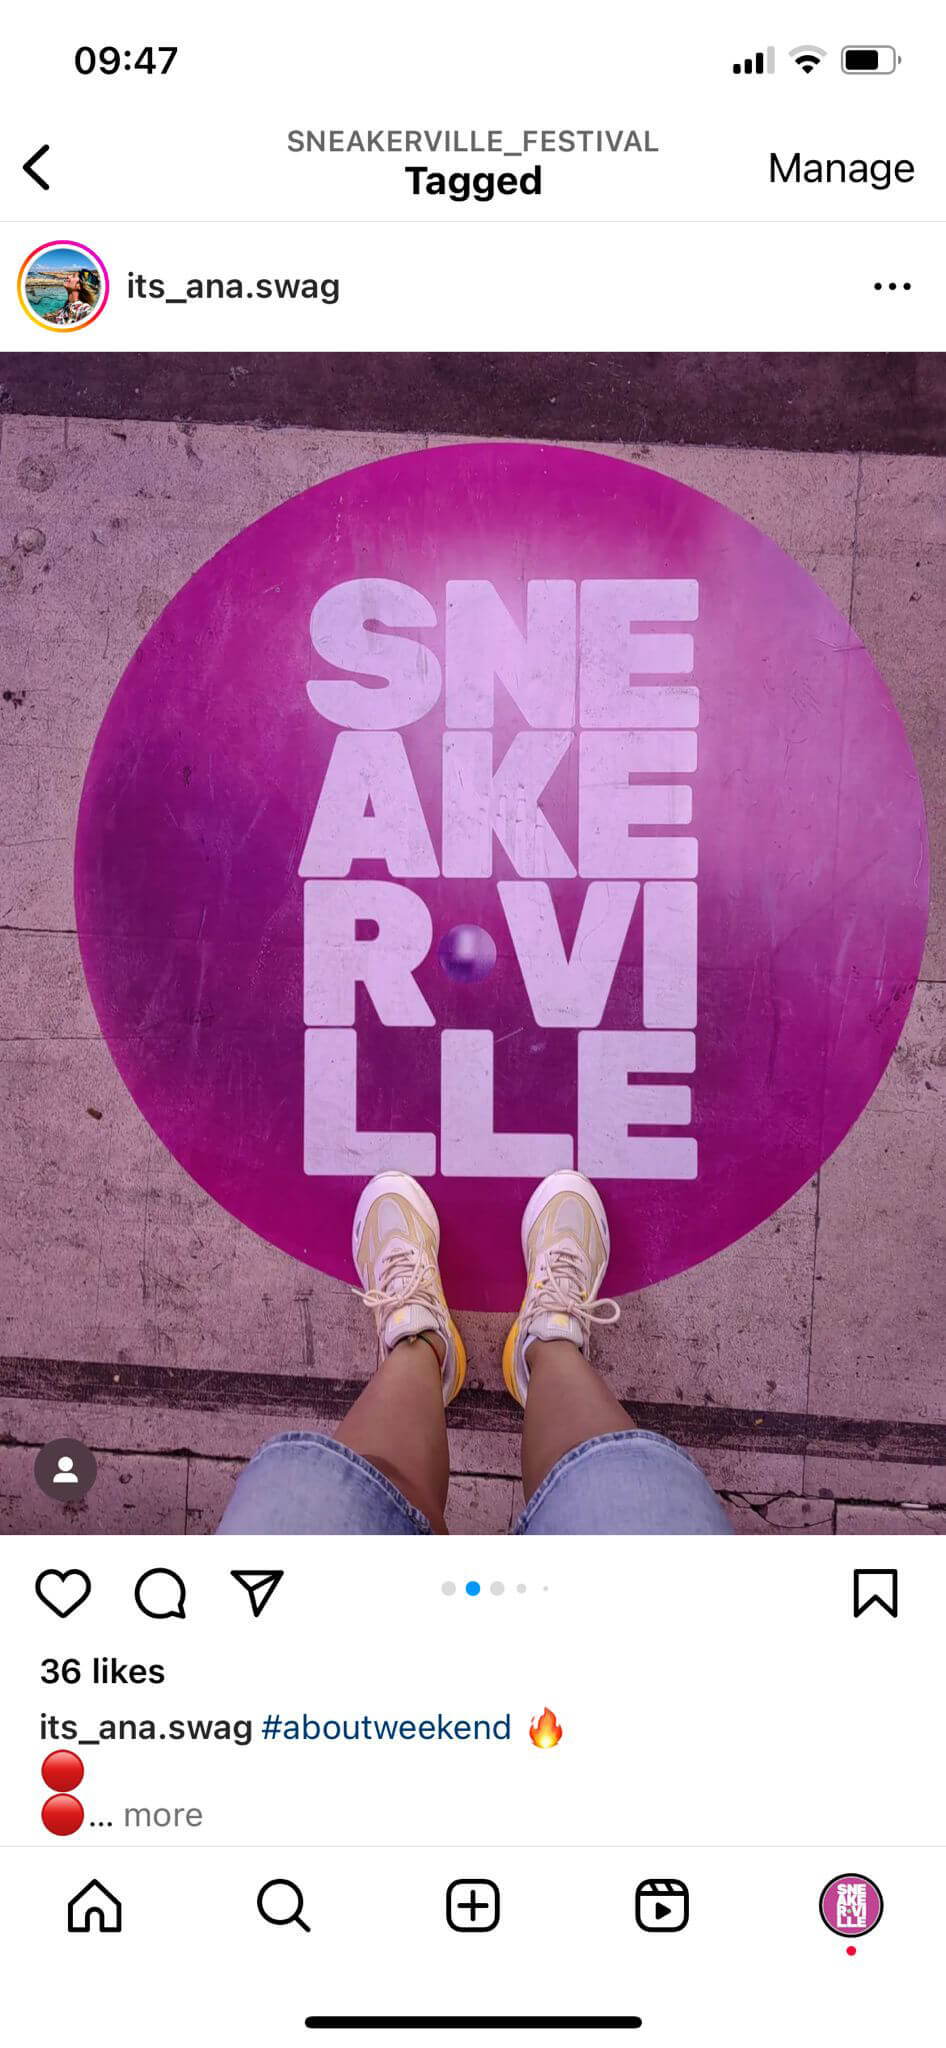 SneakerVille social media shares preview 20